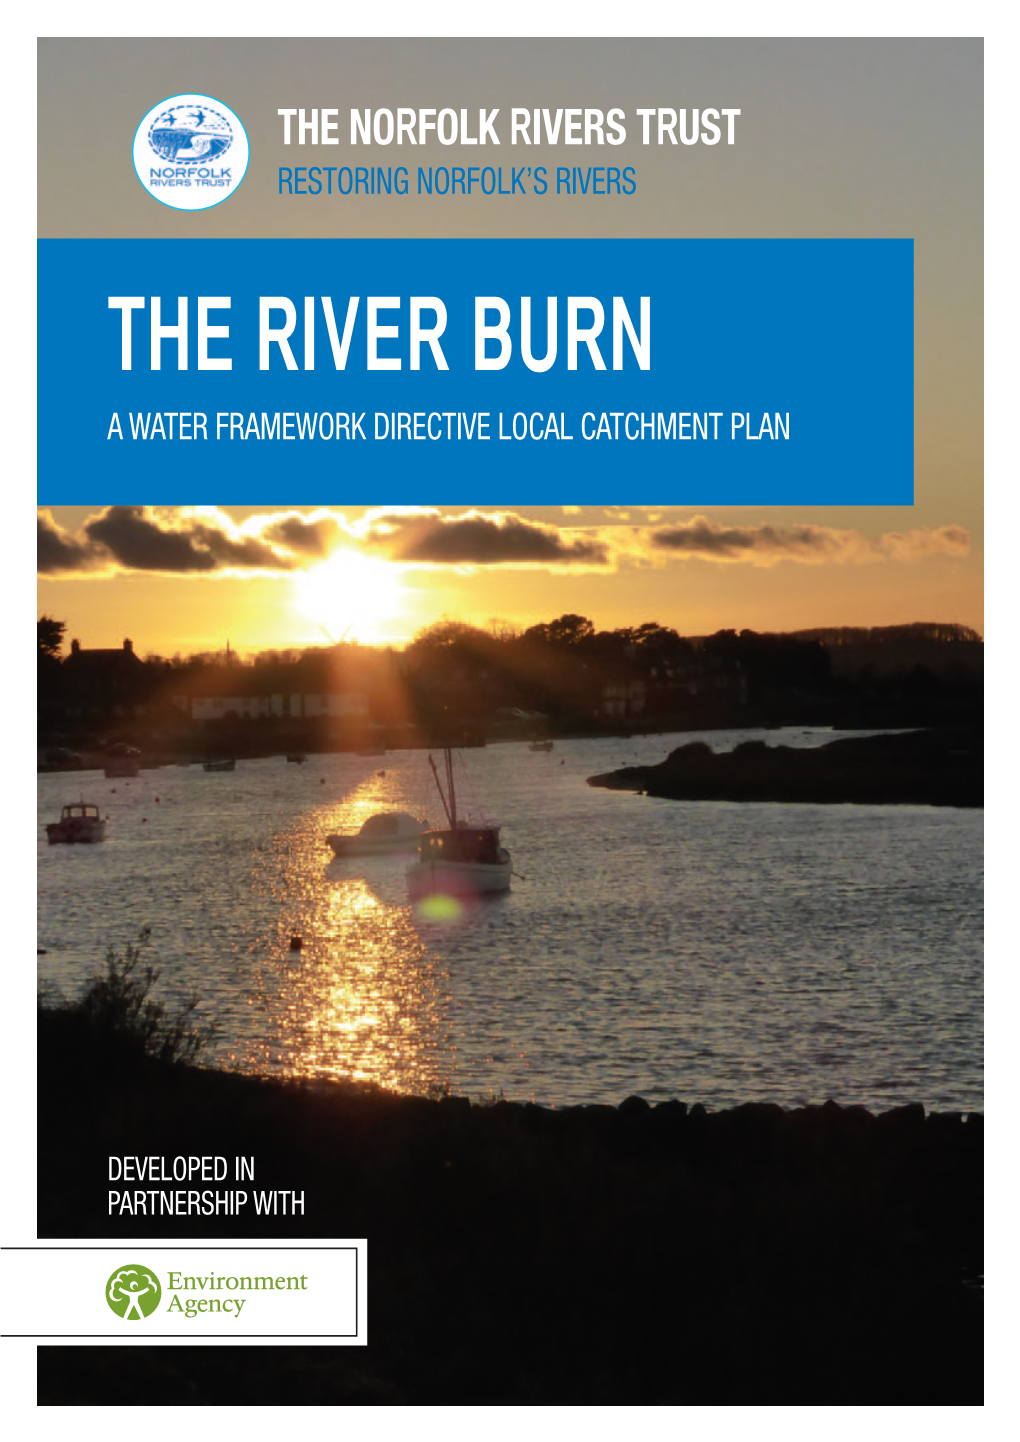 The River Burn a Water Framework Directive Local Catchment Plan